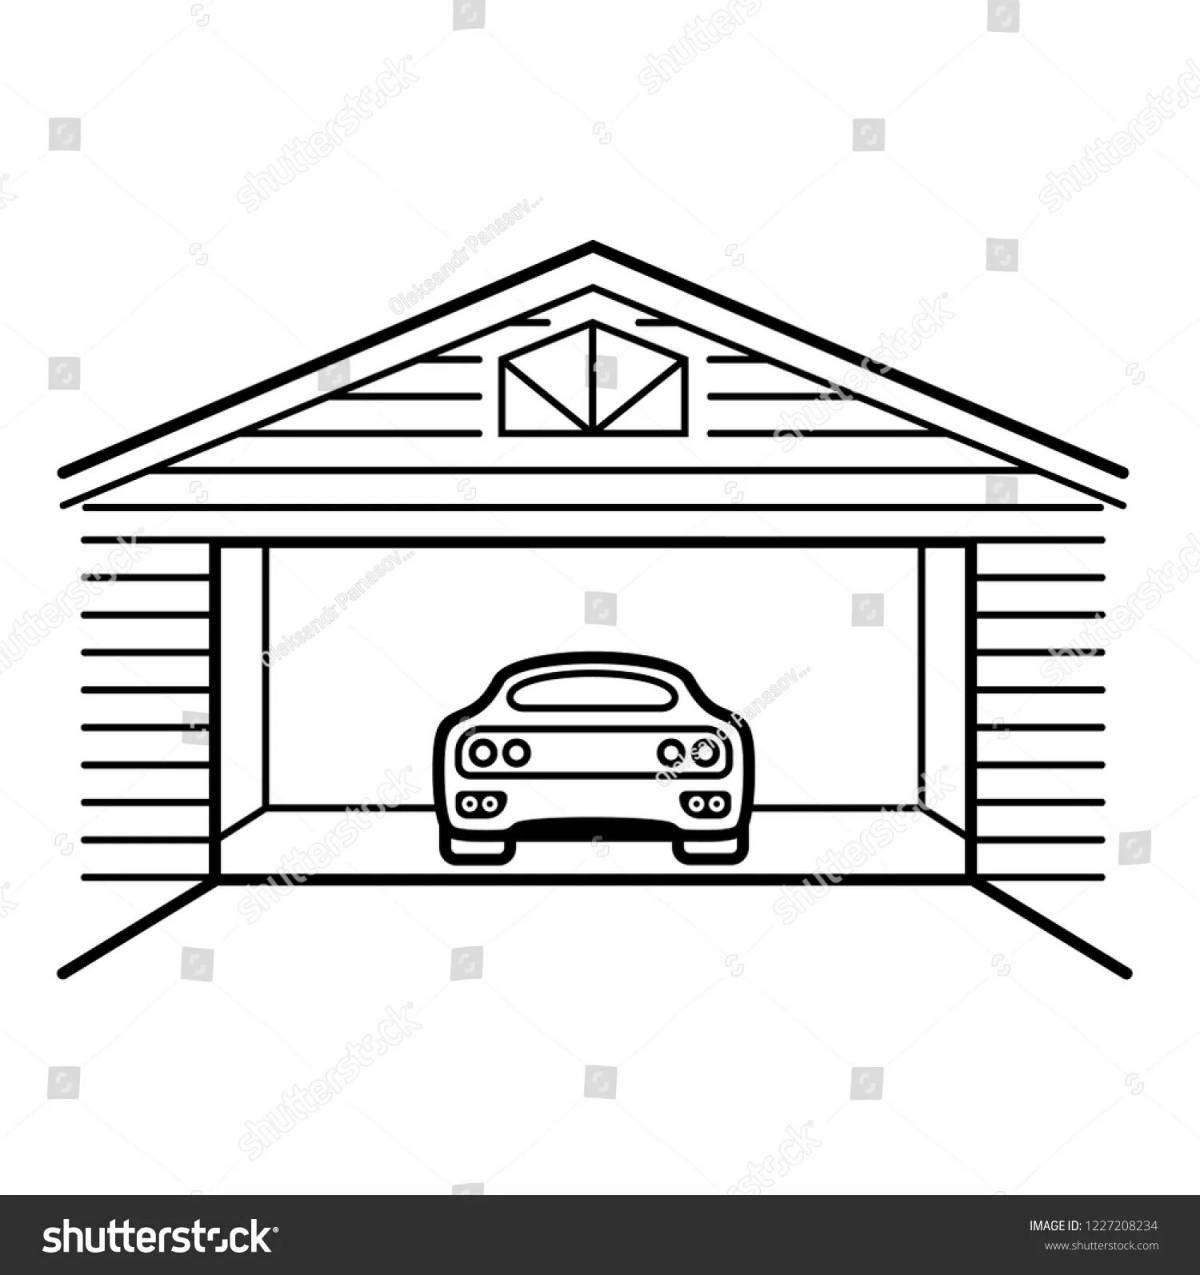 Animated garage coloring page